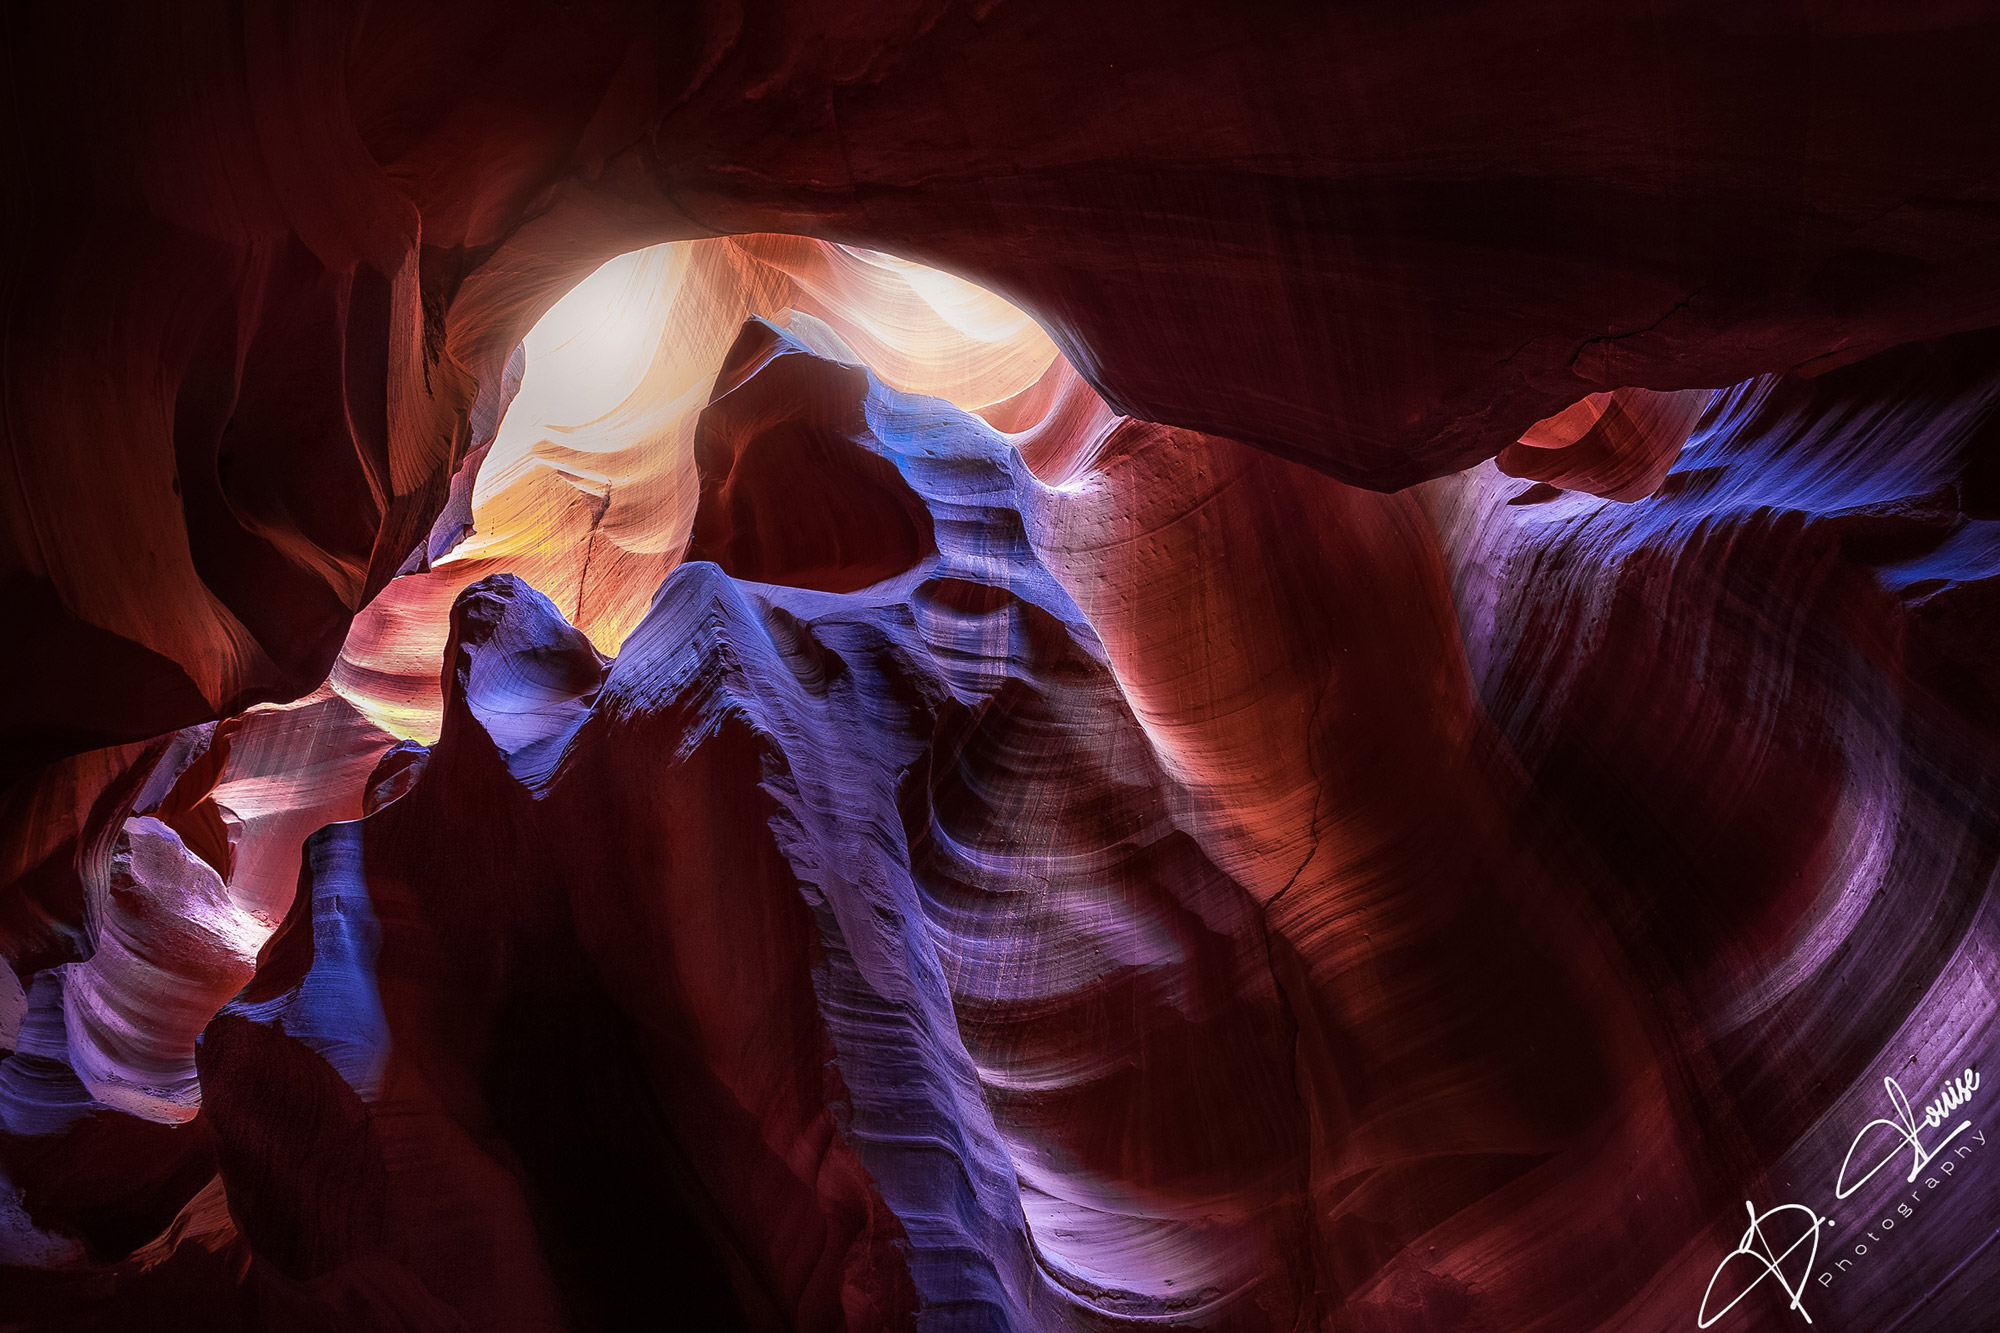 Deep into the upper parts of Antelope Canyon in southwest Arizona, the water has carved out its kindred spirit in the bear as...